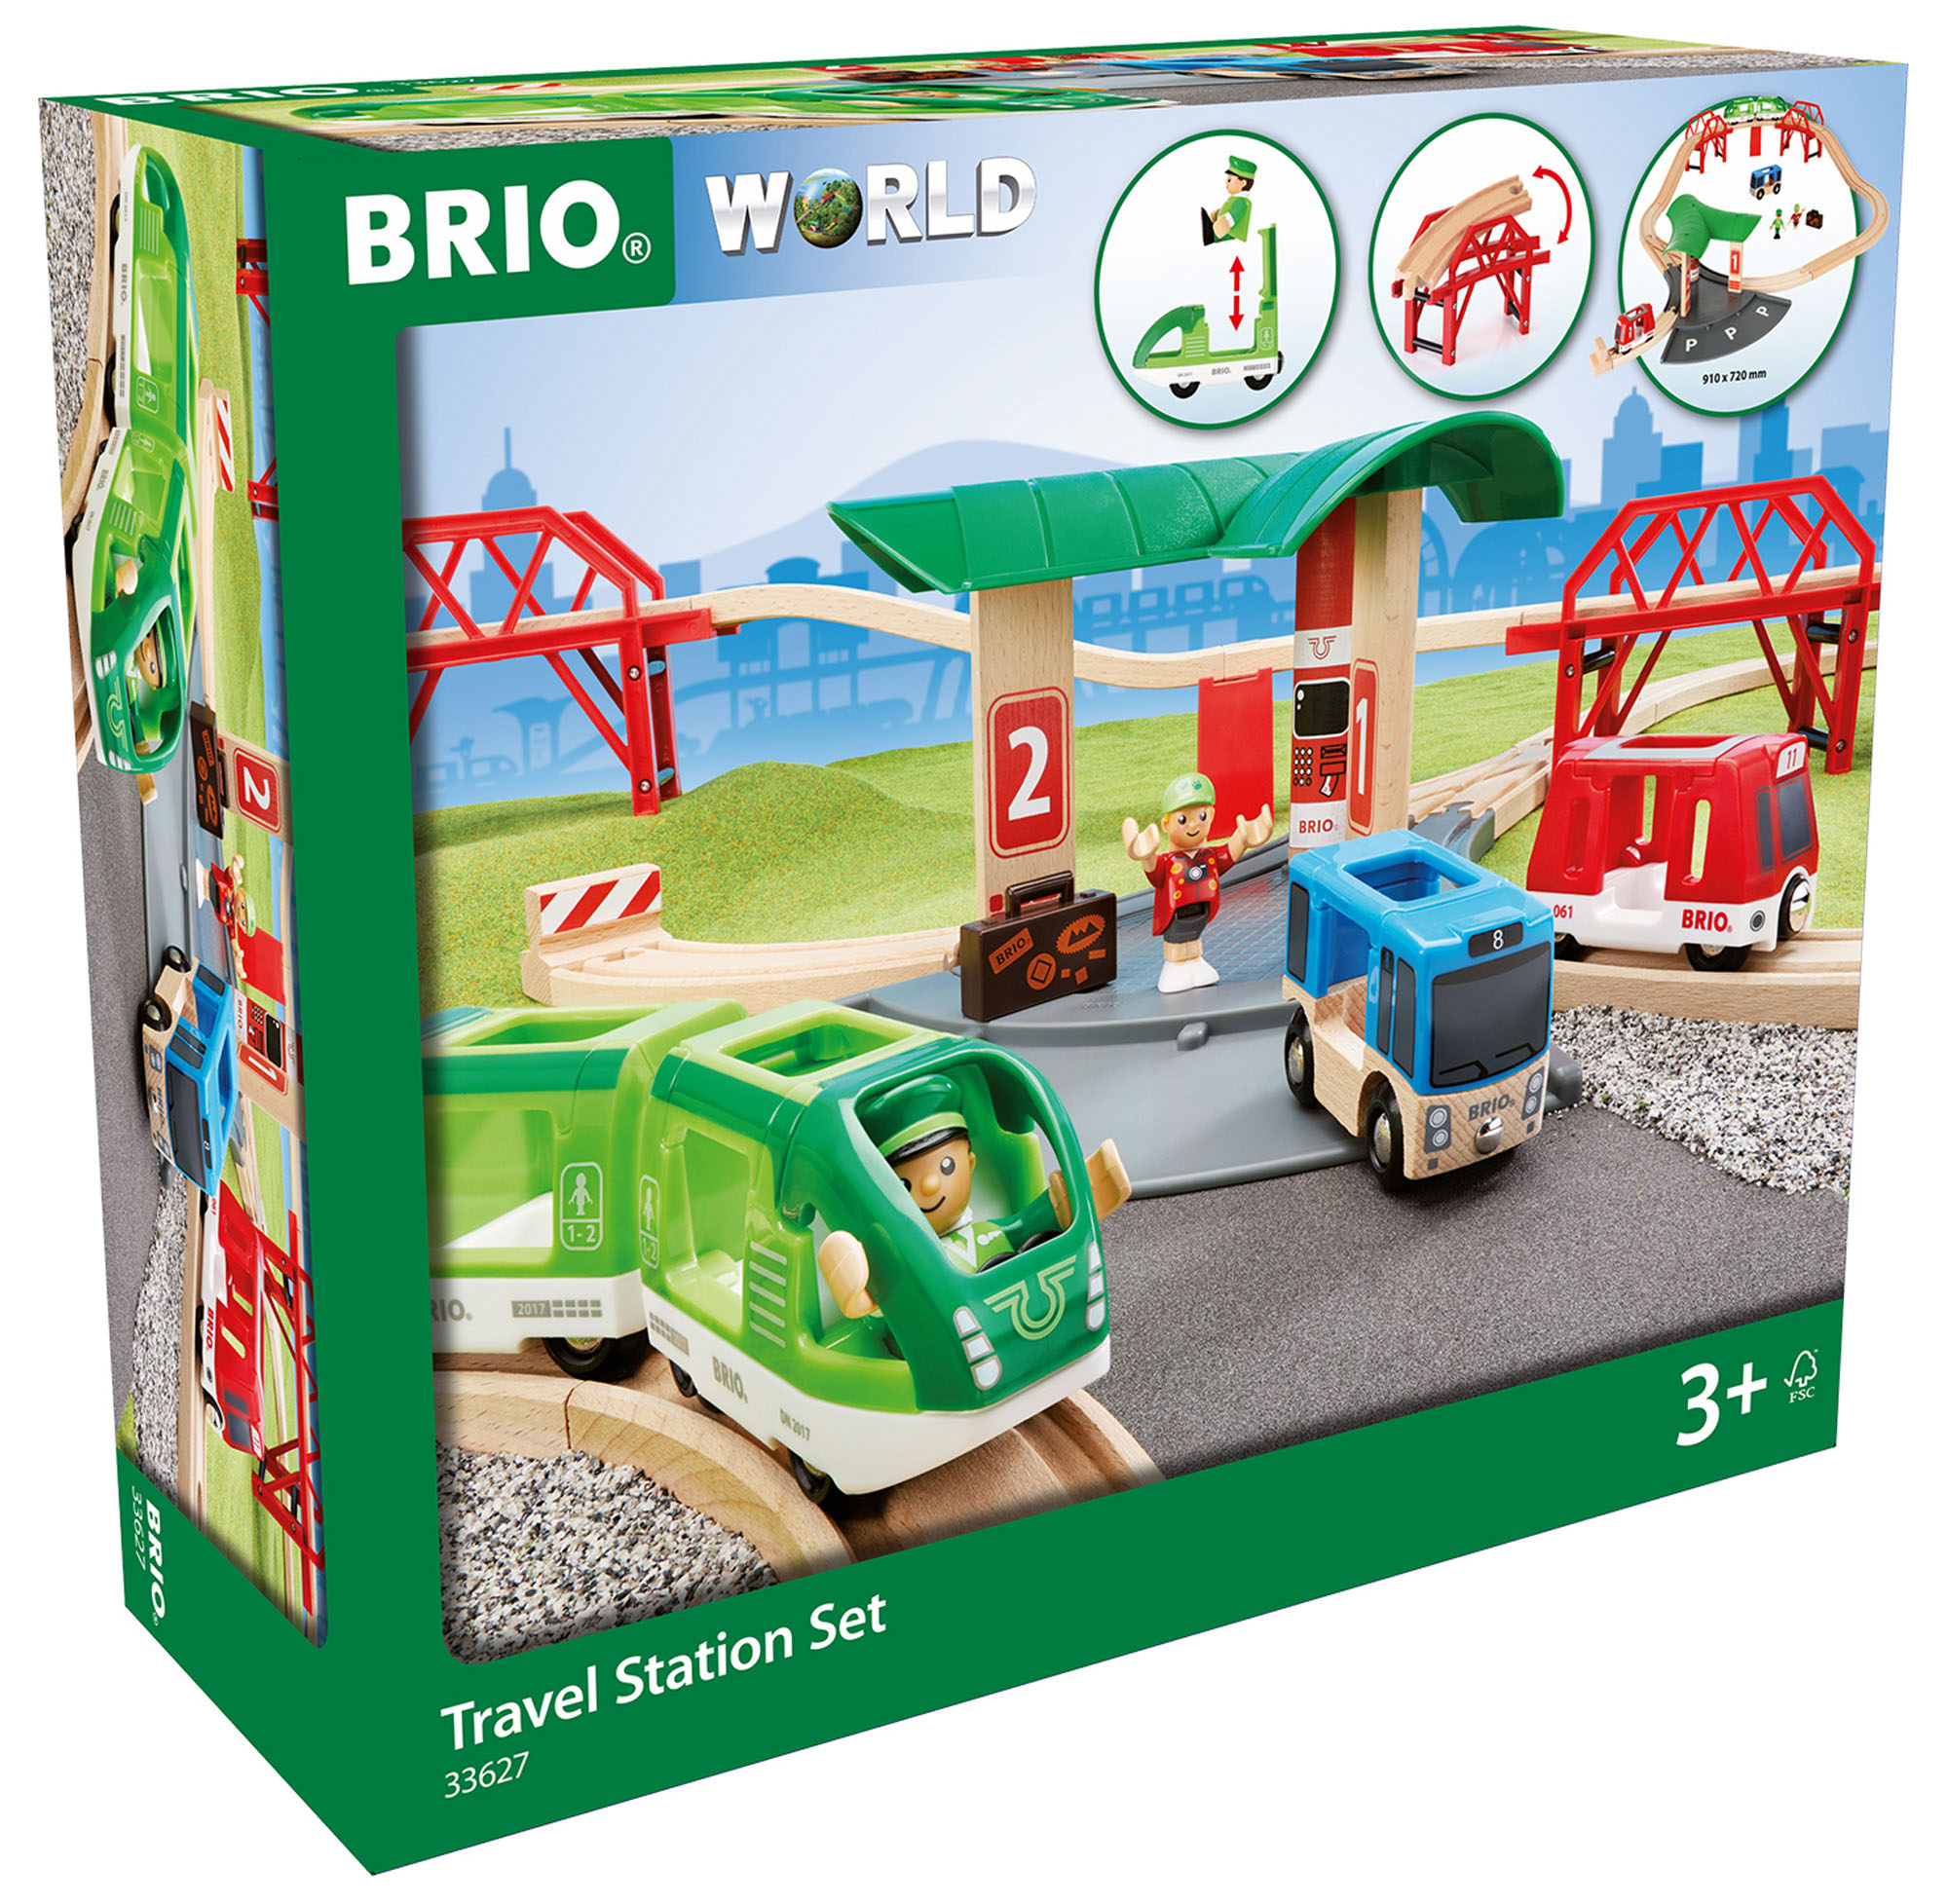 Brio Train Set Table : Amazon.com: Metropolis Train Table & Set: Toys & Games / The typical children's train table measures about four feet wide, just shy of three feet deep, and is only a foot and a half high.